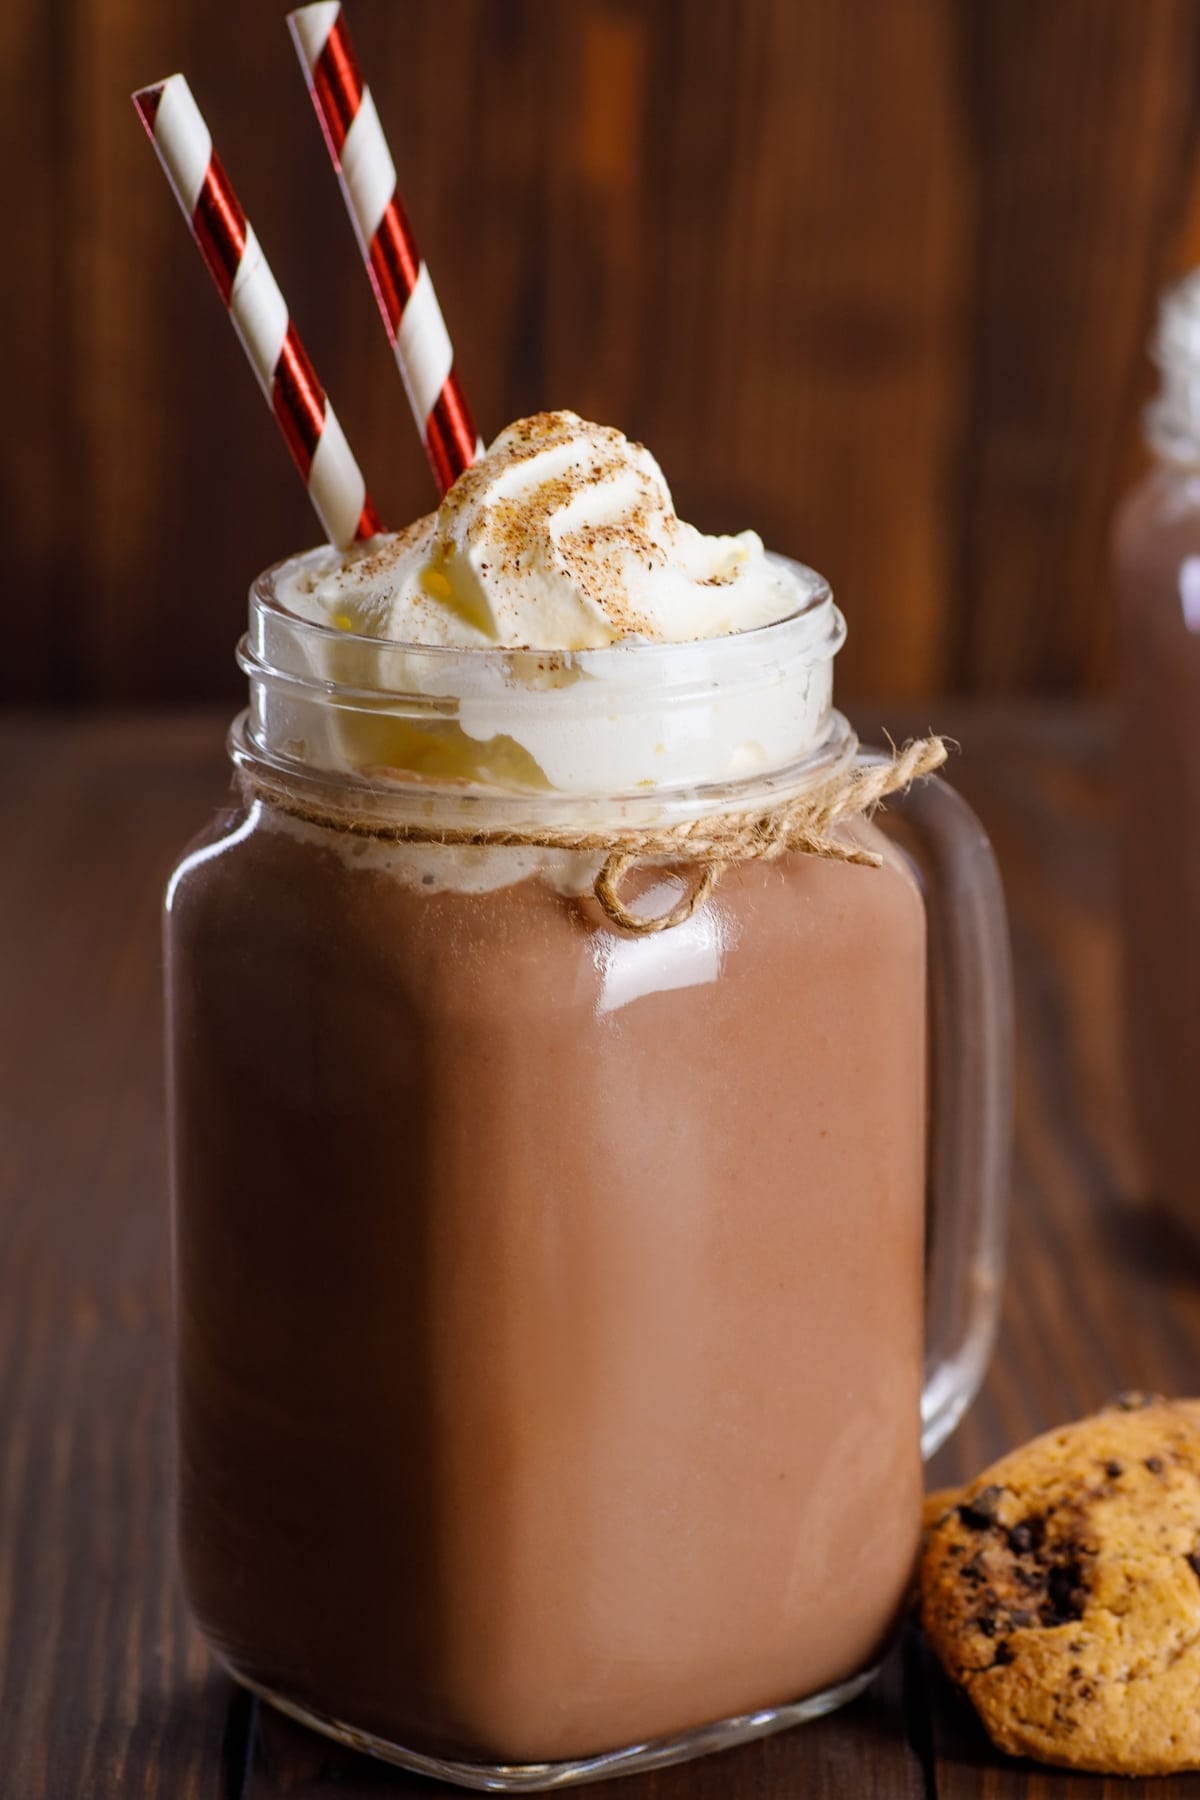 Chocolate milkshake in a glass mug topped with whipped cream and straw.